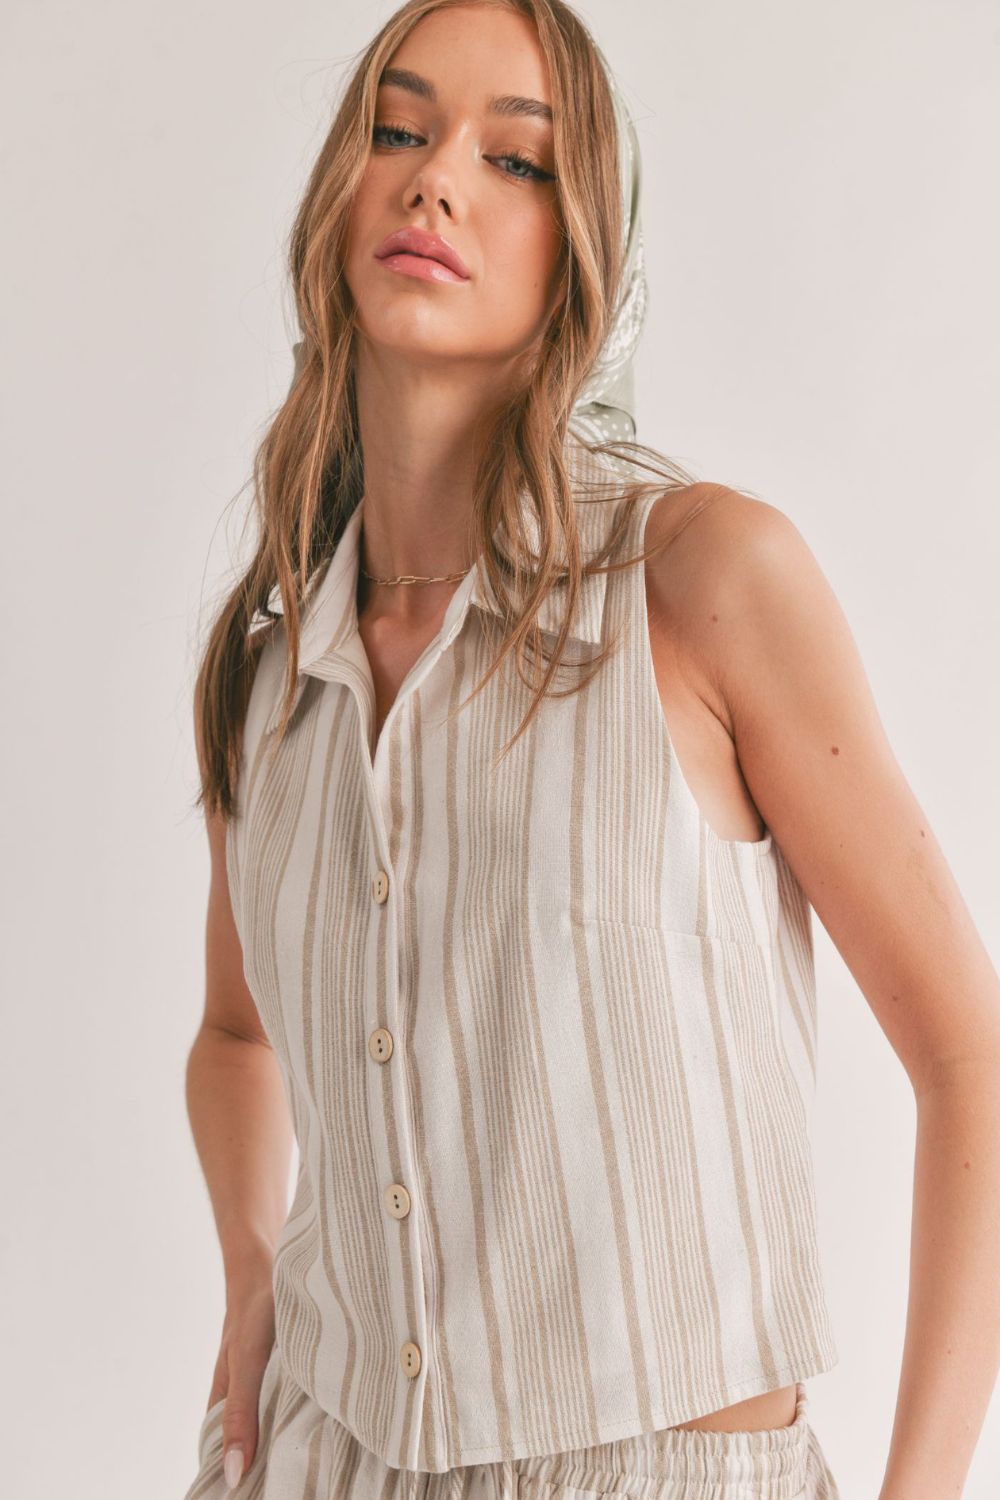 Women's Linen Blend Collared Tank Top | Ivory Taupe - Women's Shirts & Tops - Blooming Daily